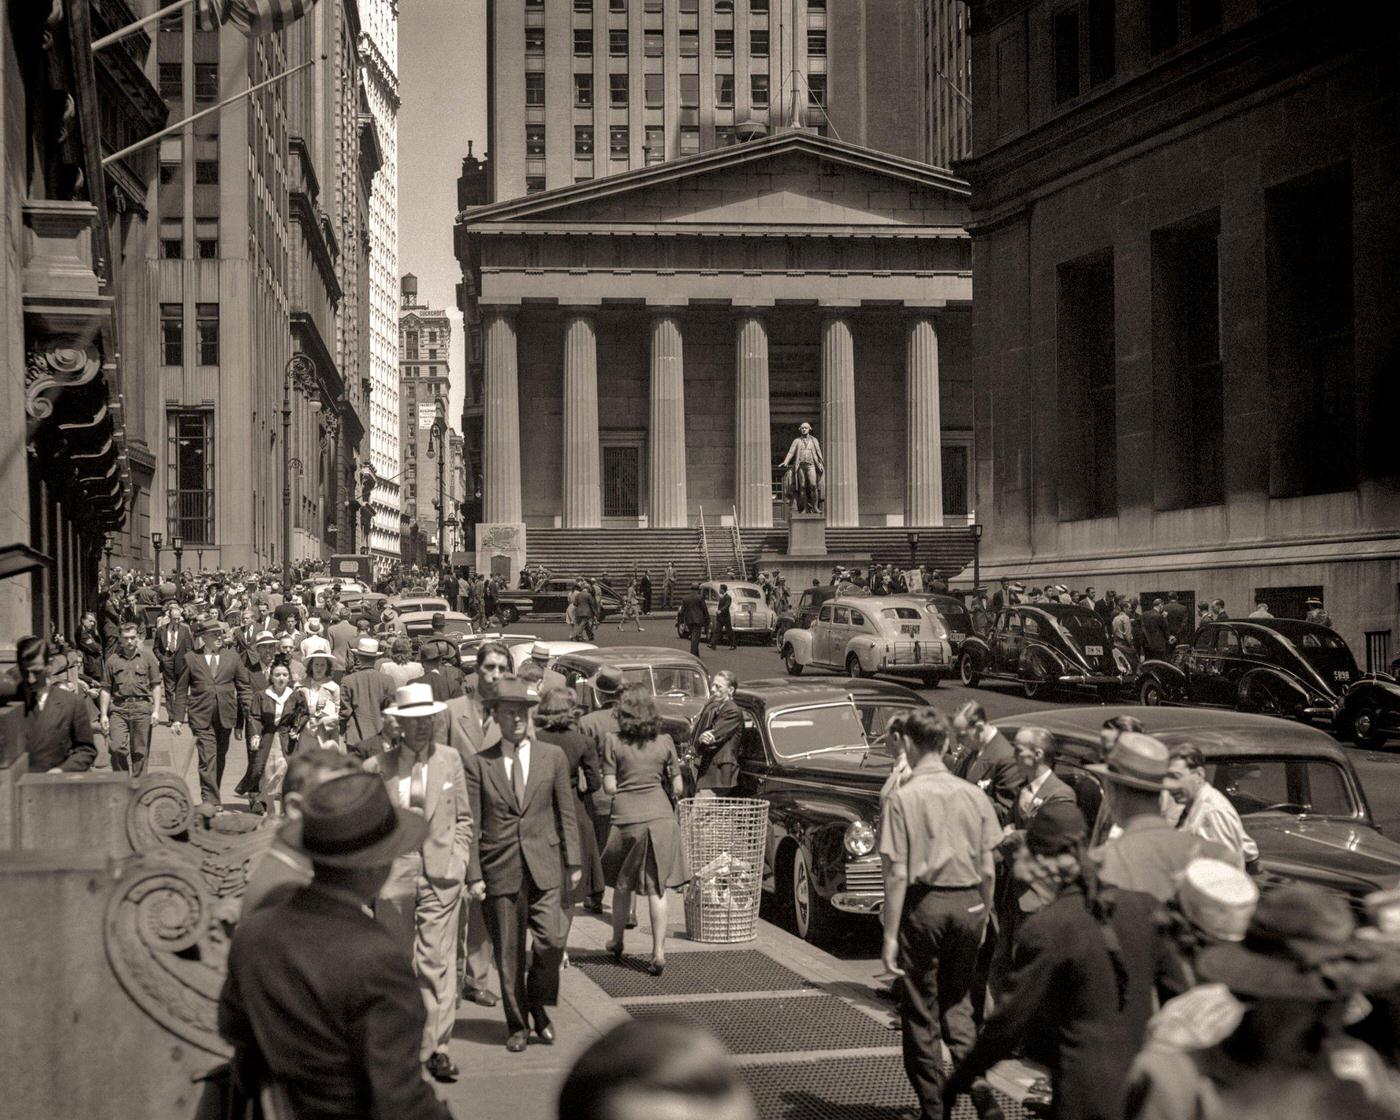 Pedestrians On Sidewalk And Automobile Traffic In Front Of Stock Exchange Building, Wall Street, Manhattan, 1940S